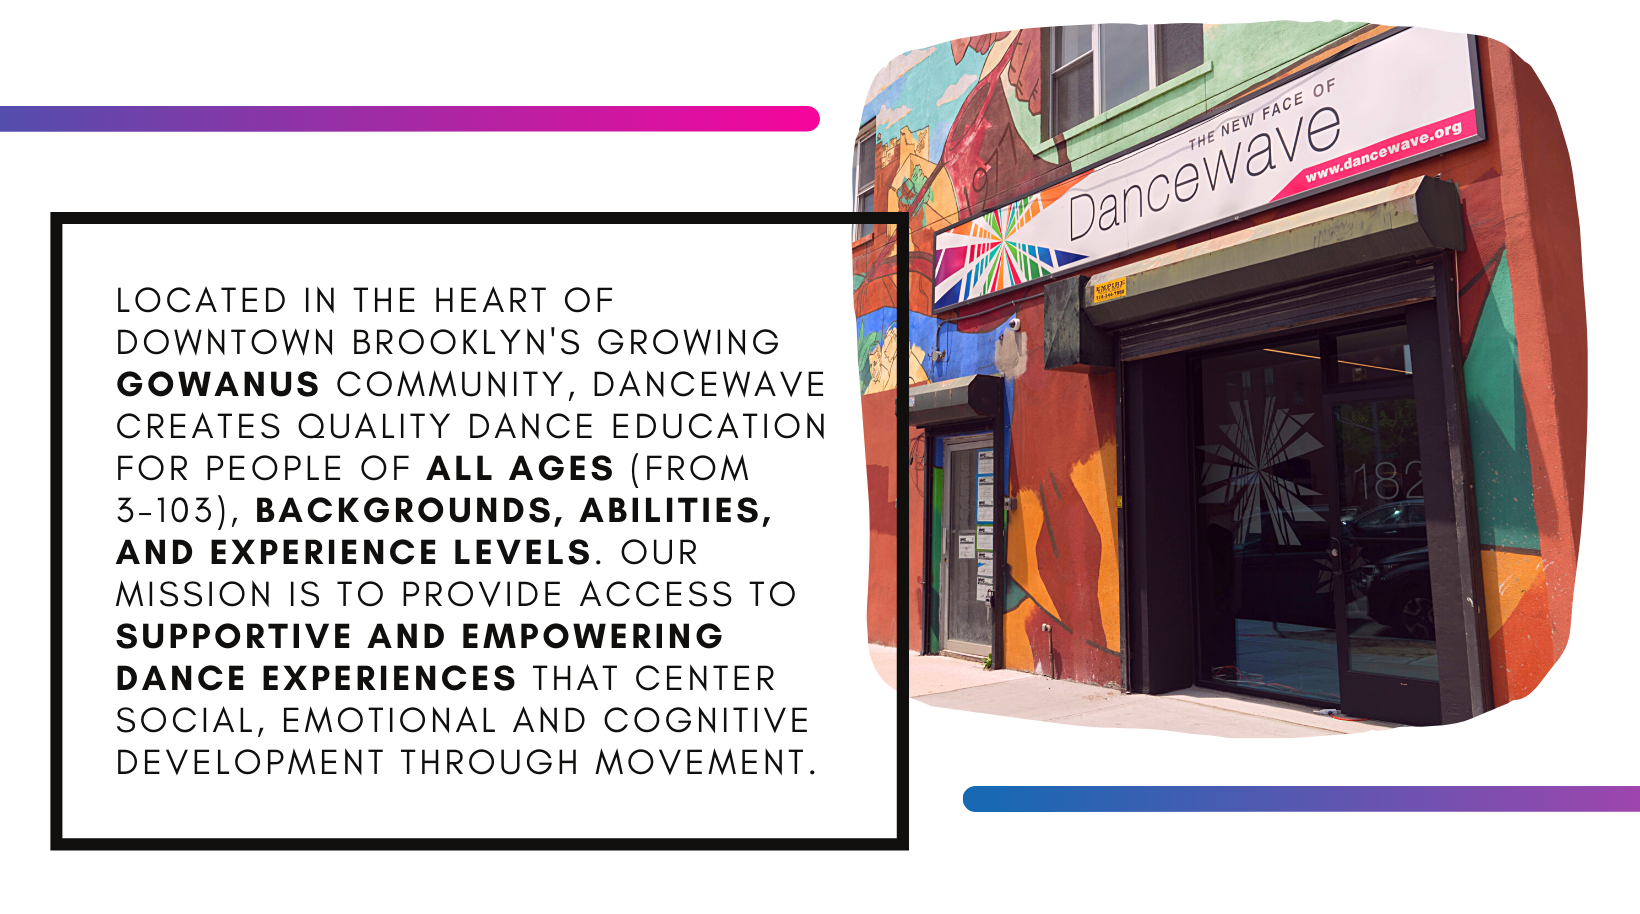 Located in the heart of downtown Brooklyn's growing Gowanus community, Dancewave creates quality dance education for people of all ages (from 3-103), backgrounds, abilities, and experience levels. Our mission is to provide access to supportive and empowering dance experiences that center social, emotional and cognitive development through movement.